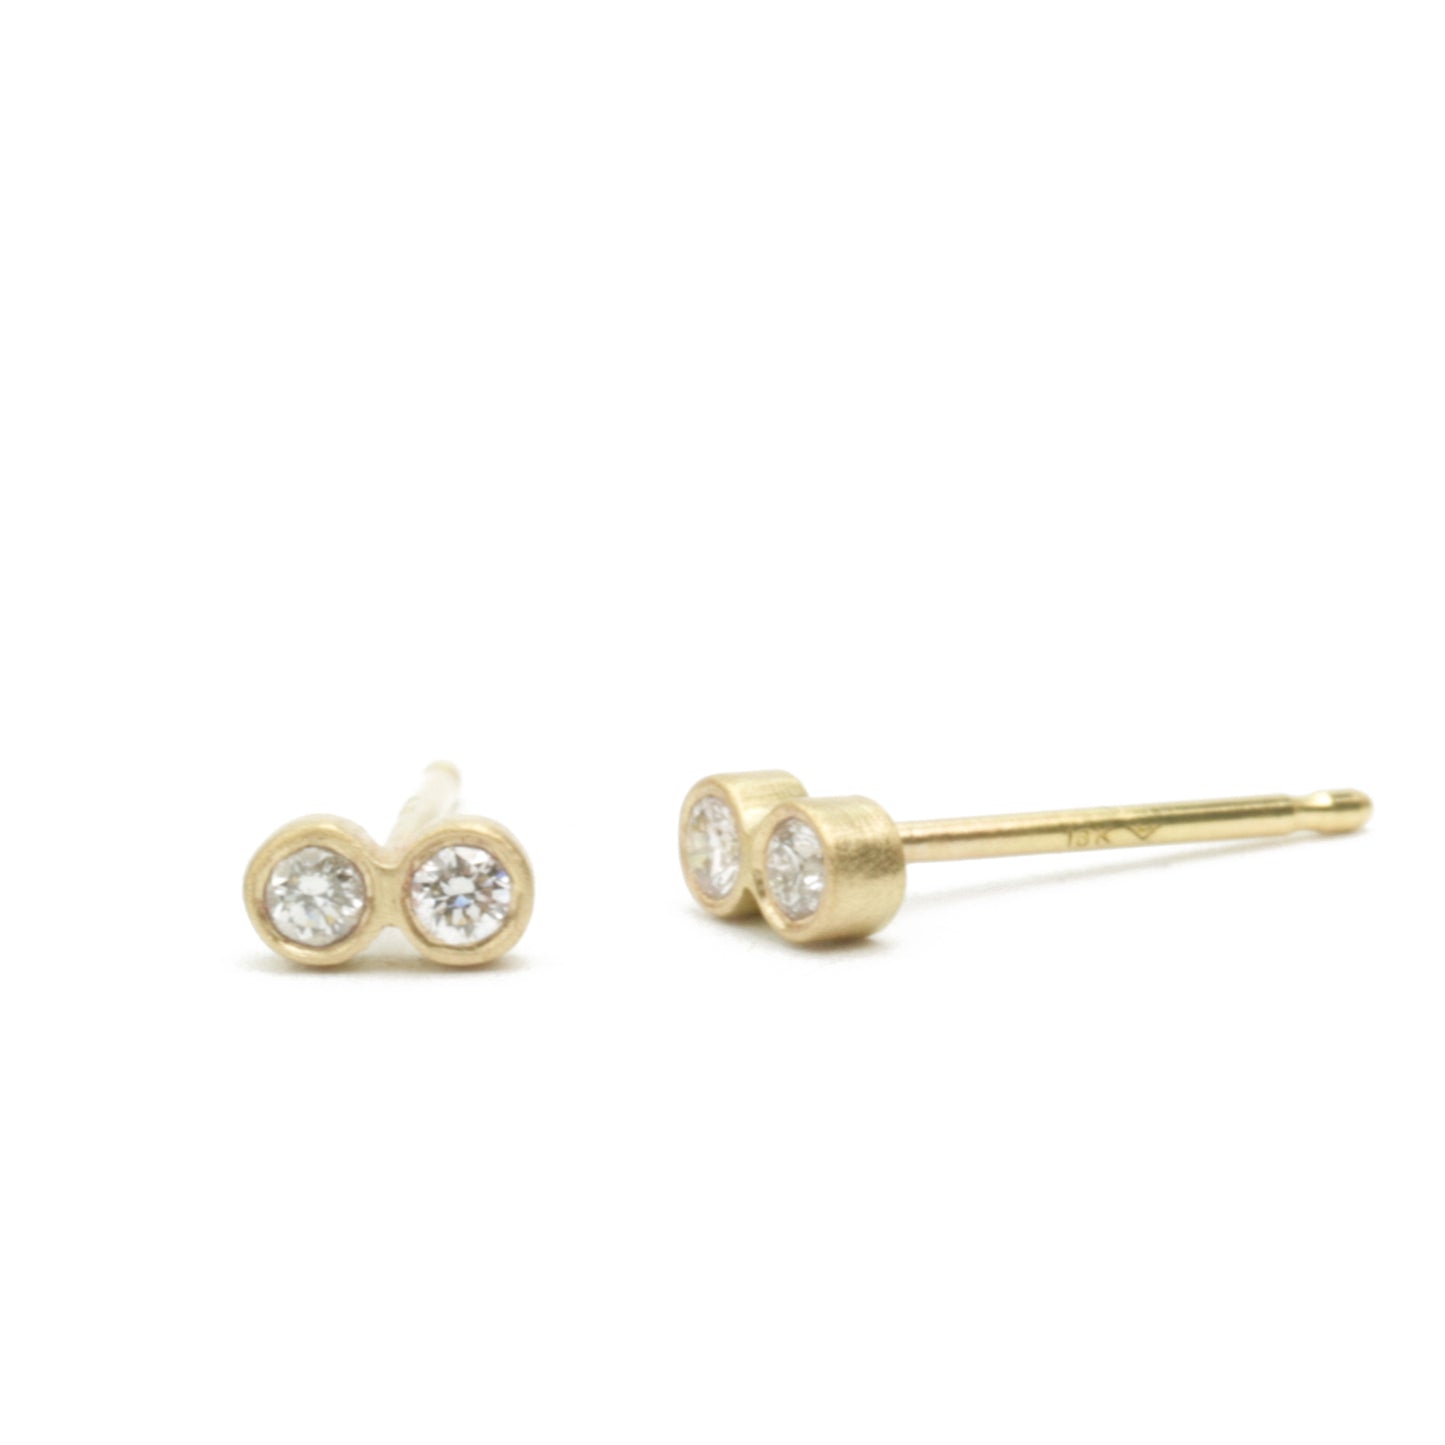 Marian Maurer Teeny Stud Double with 2 point diamonds 18K Gold Earrings